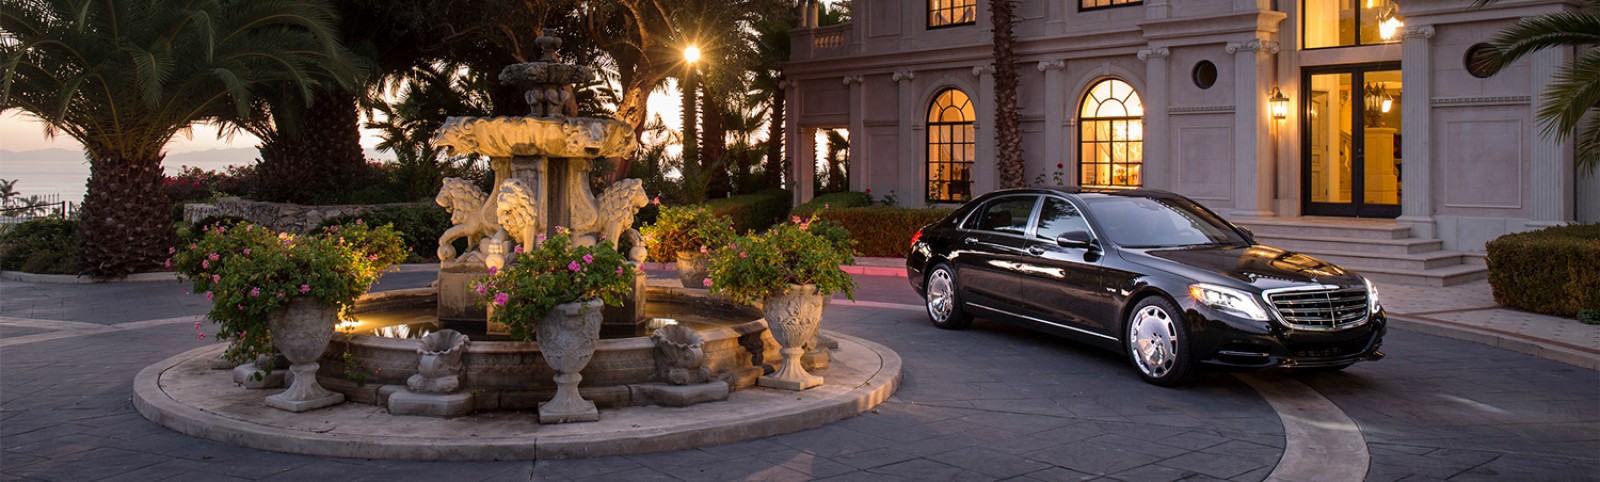 Private Chauffeur on the French Riviera For Events- Premium Vehicles & Services - Reactivity 24/7 - Ruby Services - Car Rental with Driver Côte d'Azur